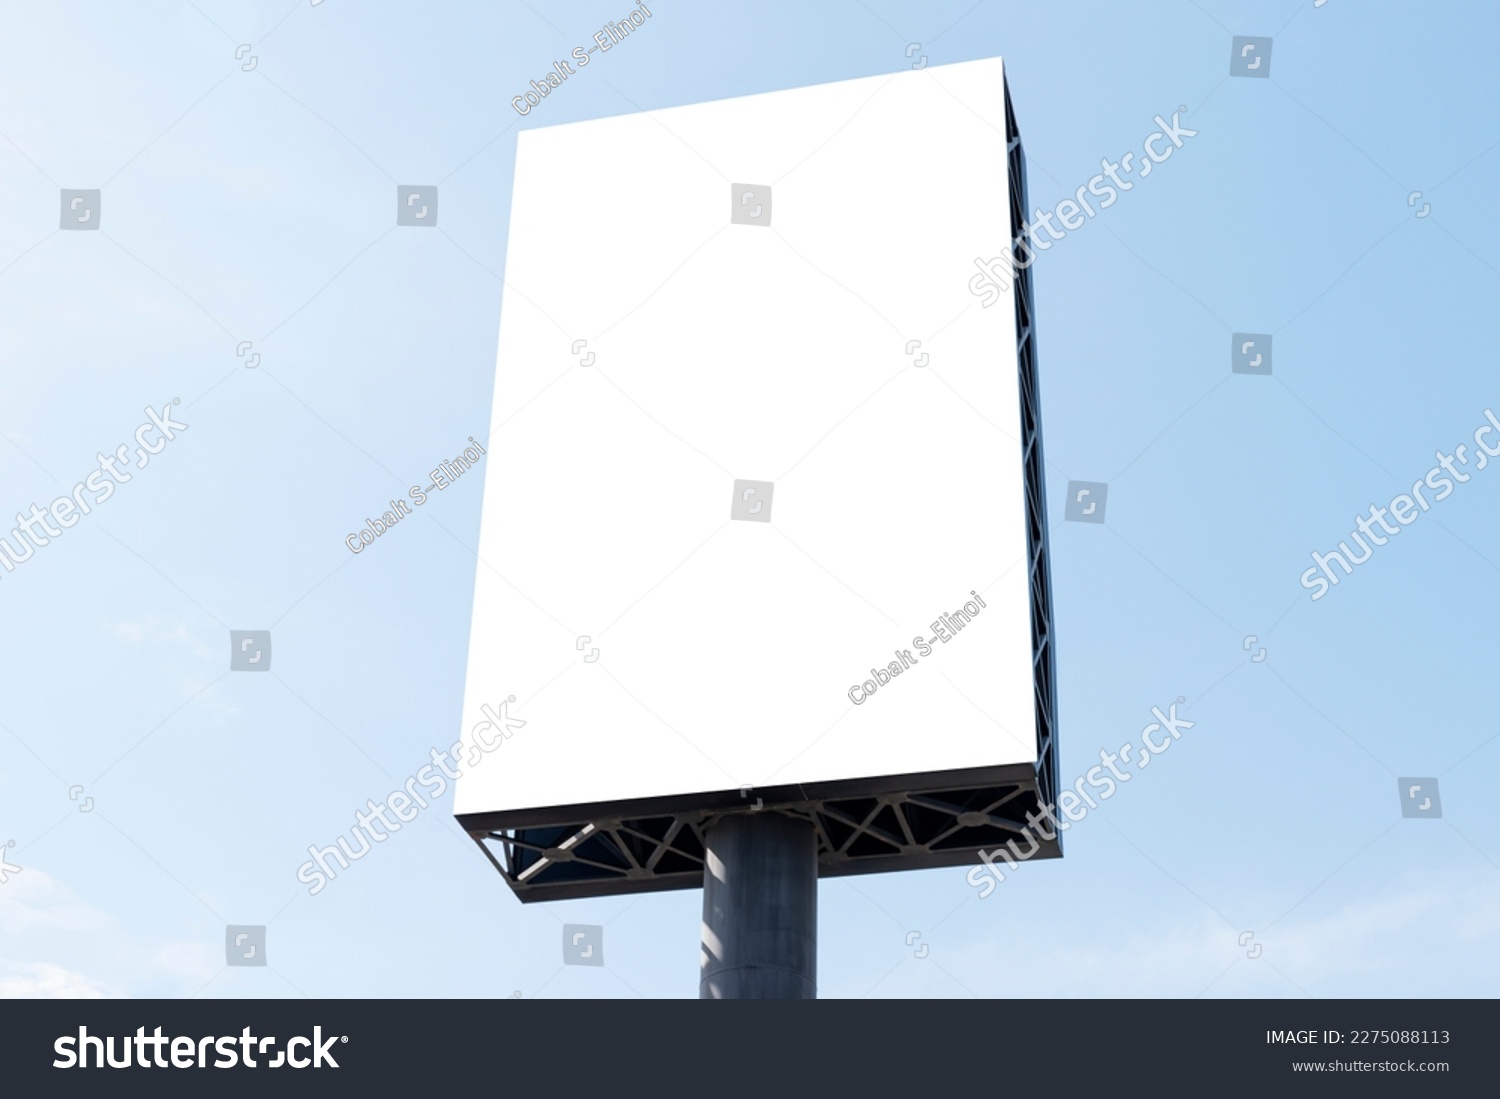 Outdoor pole billboard on blue sky background with mock up white screen and clipping path #2275088113